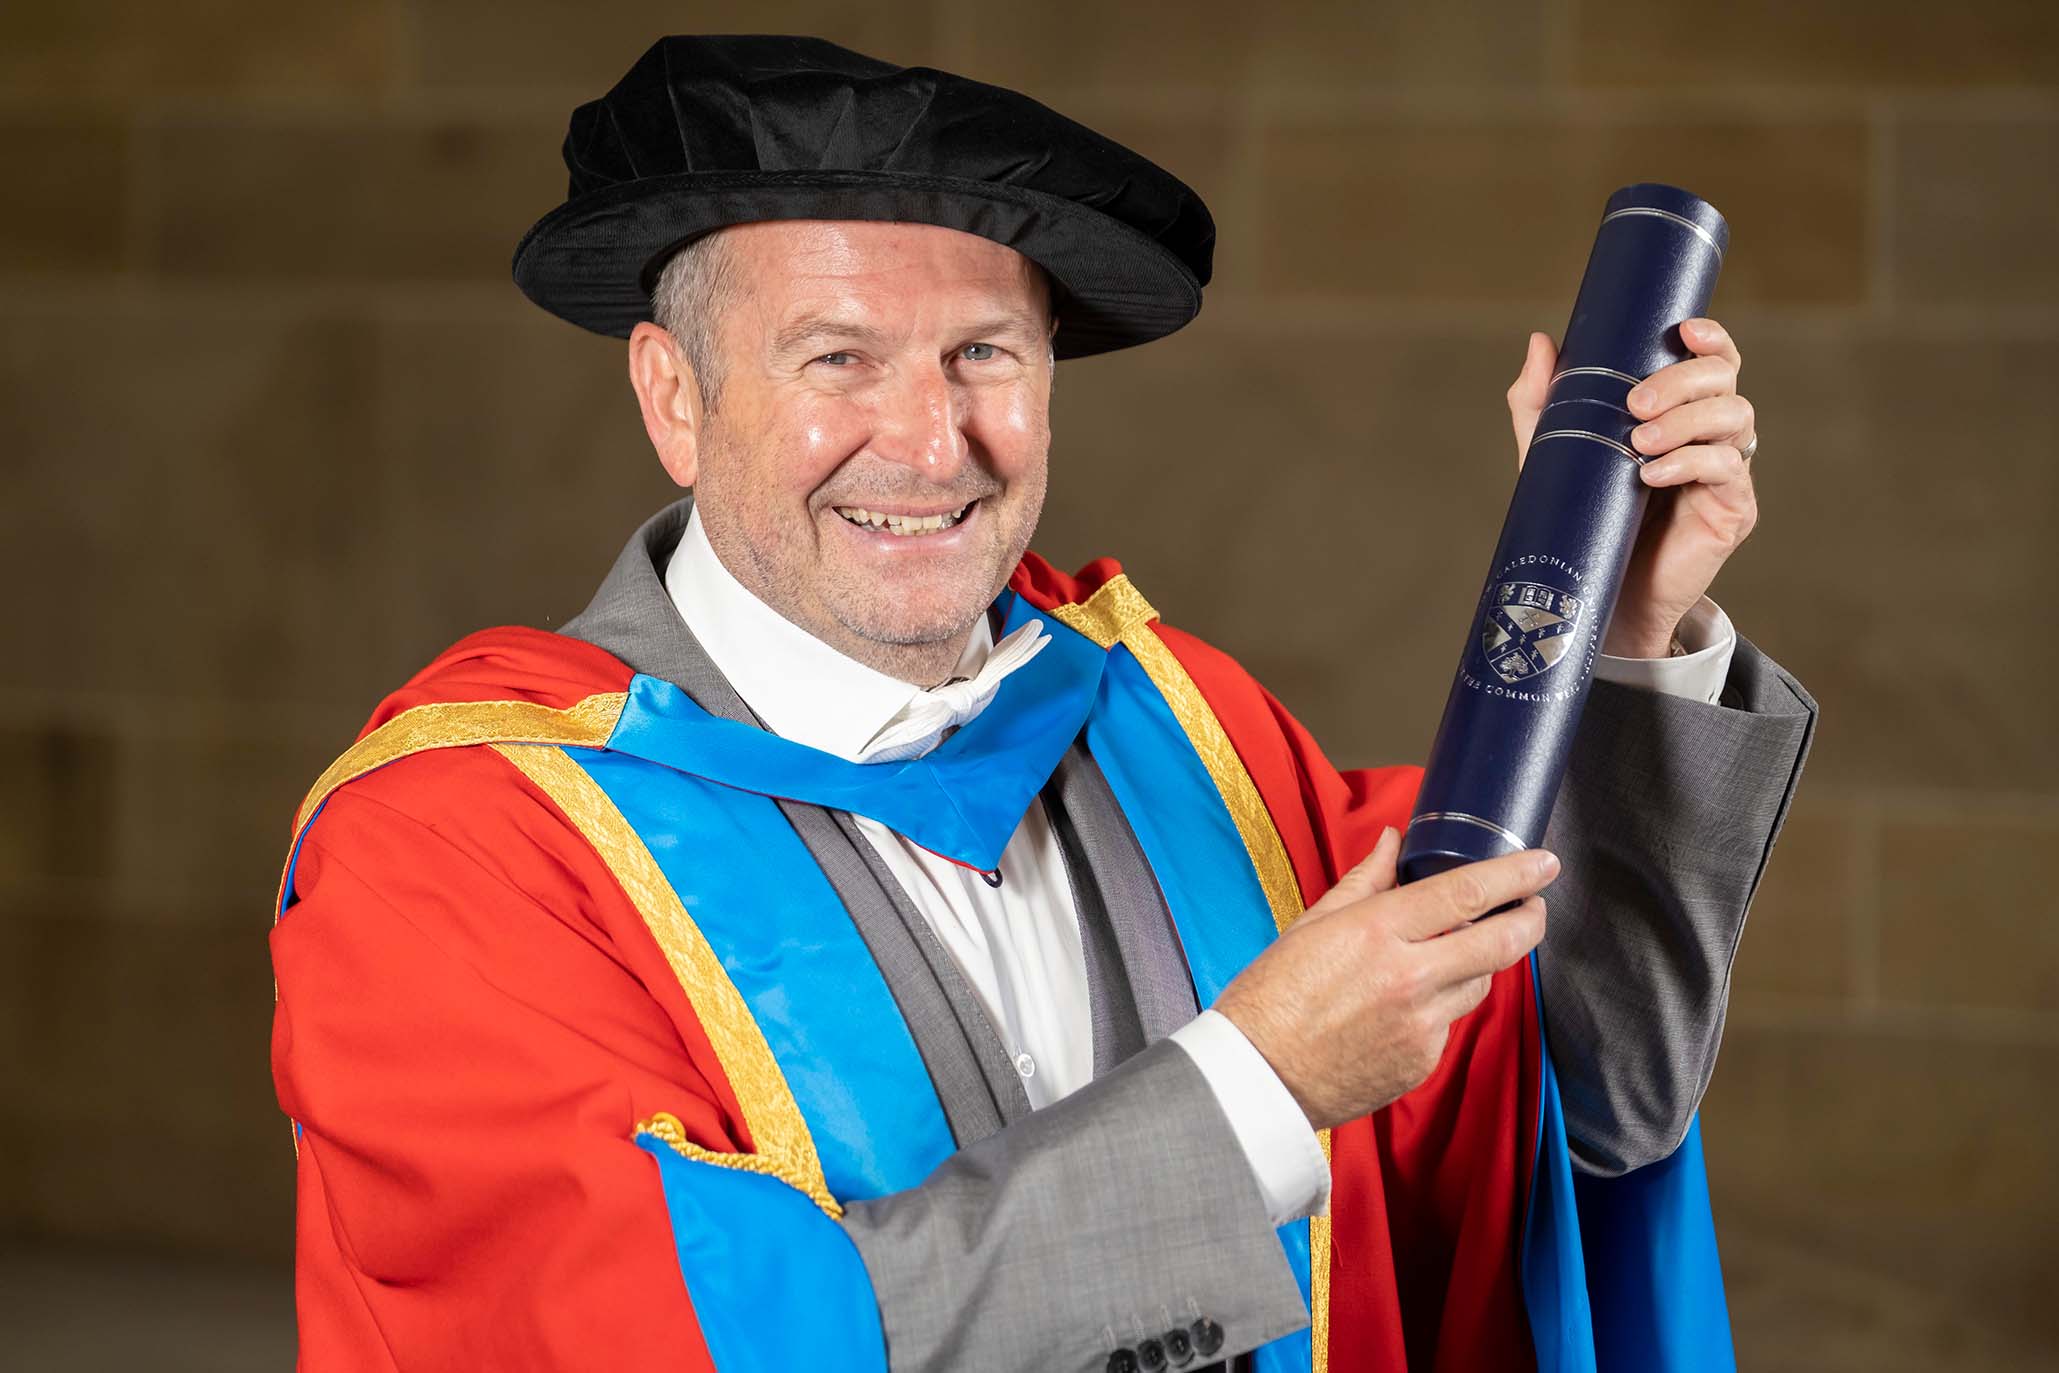 GCU Honorary Graduate Dr Stephen Breslin wearing his graduation hood and hat and holding a degree container.